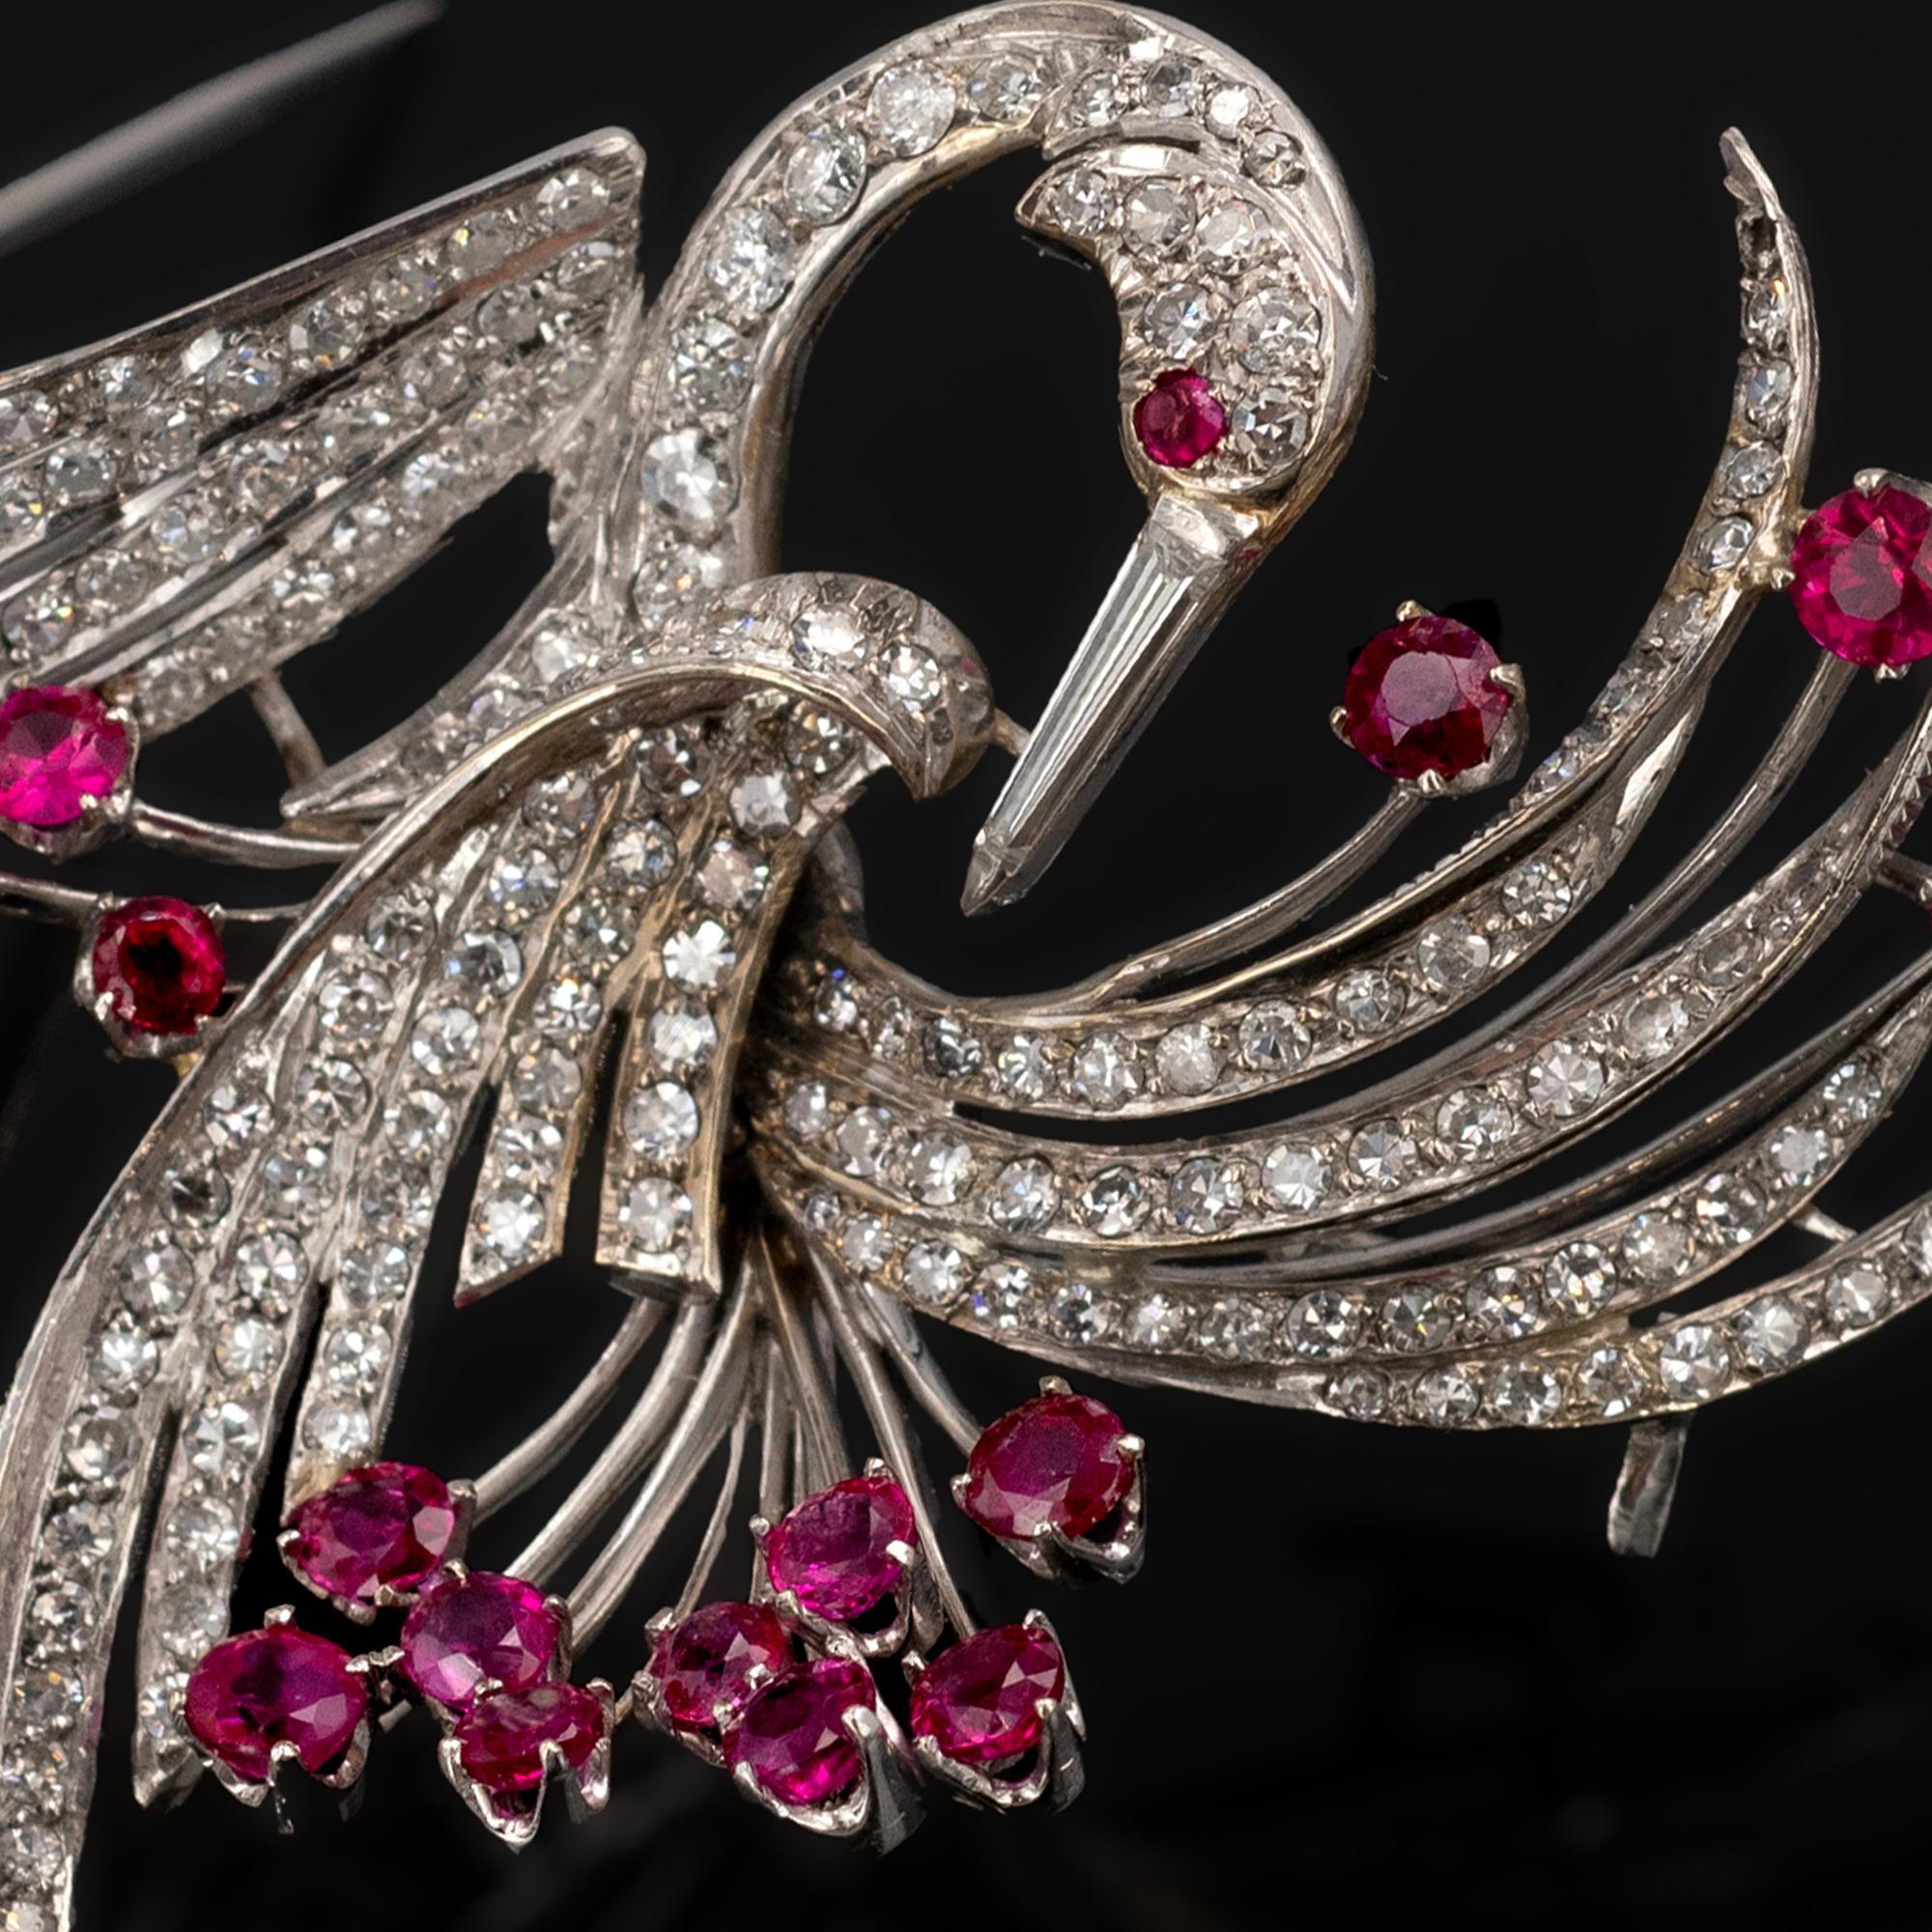 Art Deco Mid-20th Century White Gold Bird Brooch with Pavé Diamonds and Ruby Accents For Sale